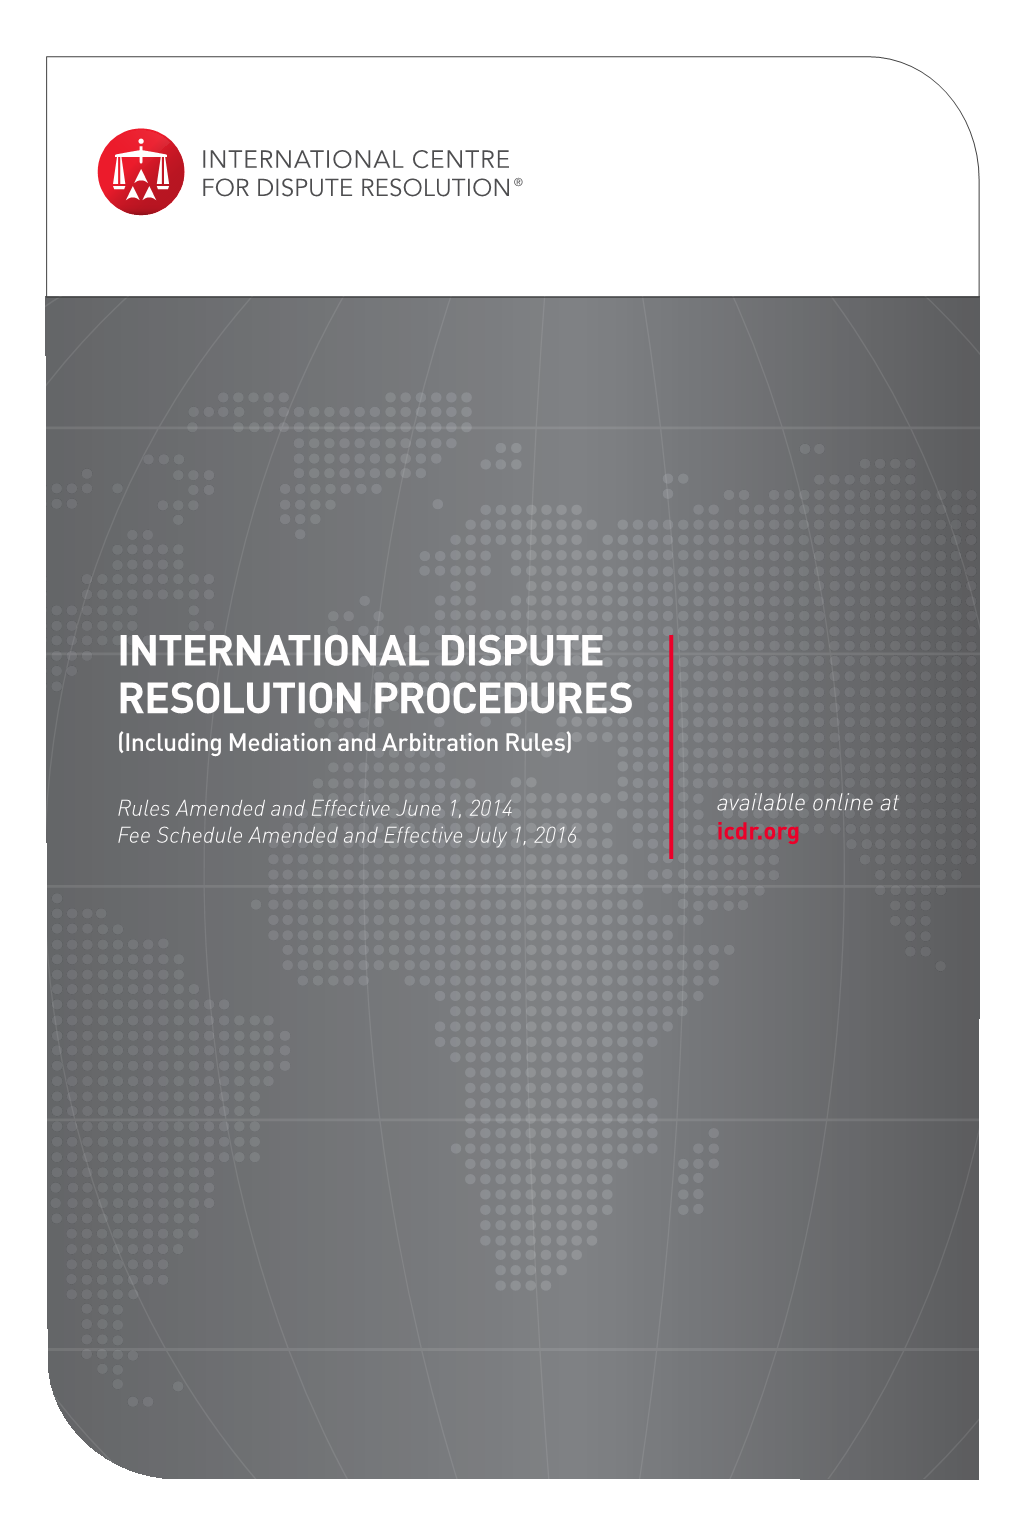 INTERNATIONAL DISPUTE RESOLUTION PROCEDURES (Including Mediation and Arbitration Rules)